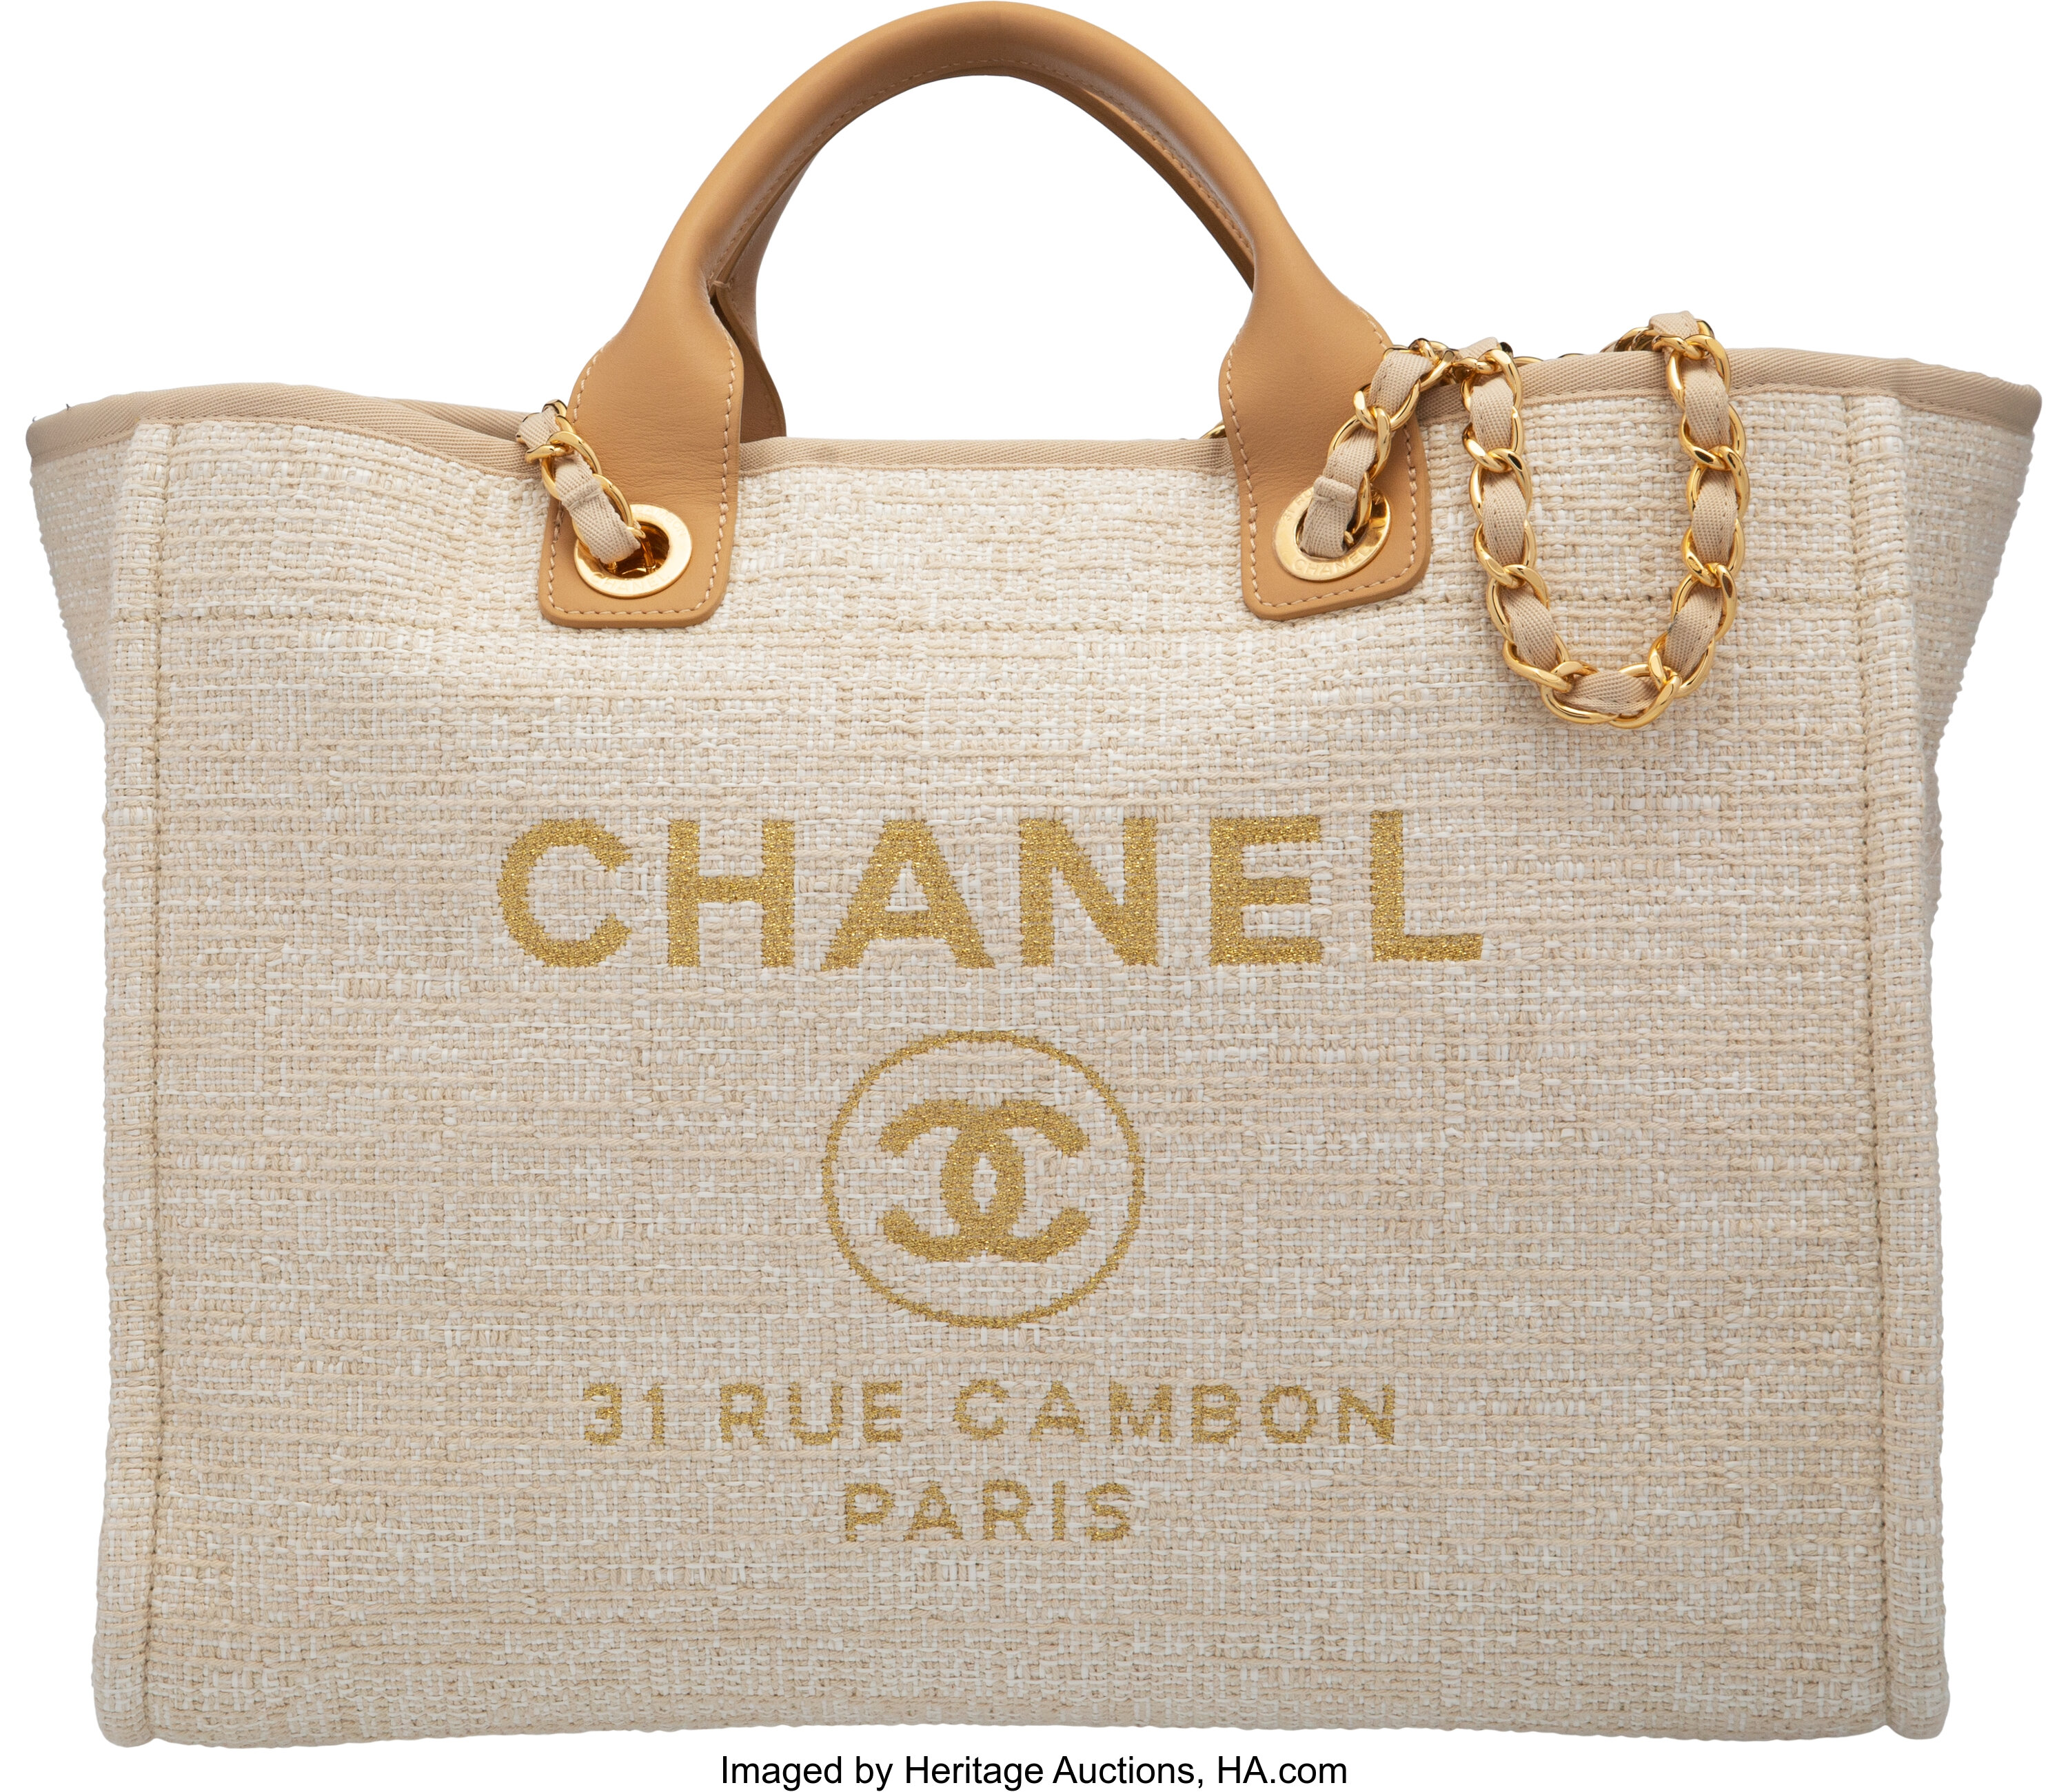 Chanel 31 Rue Cambon Tote Bag Auction